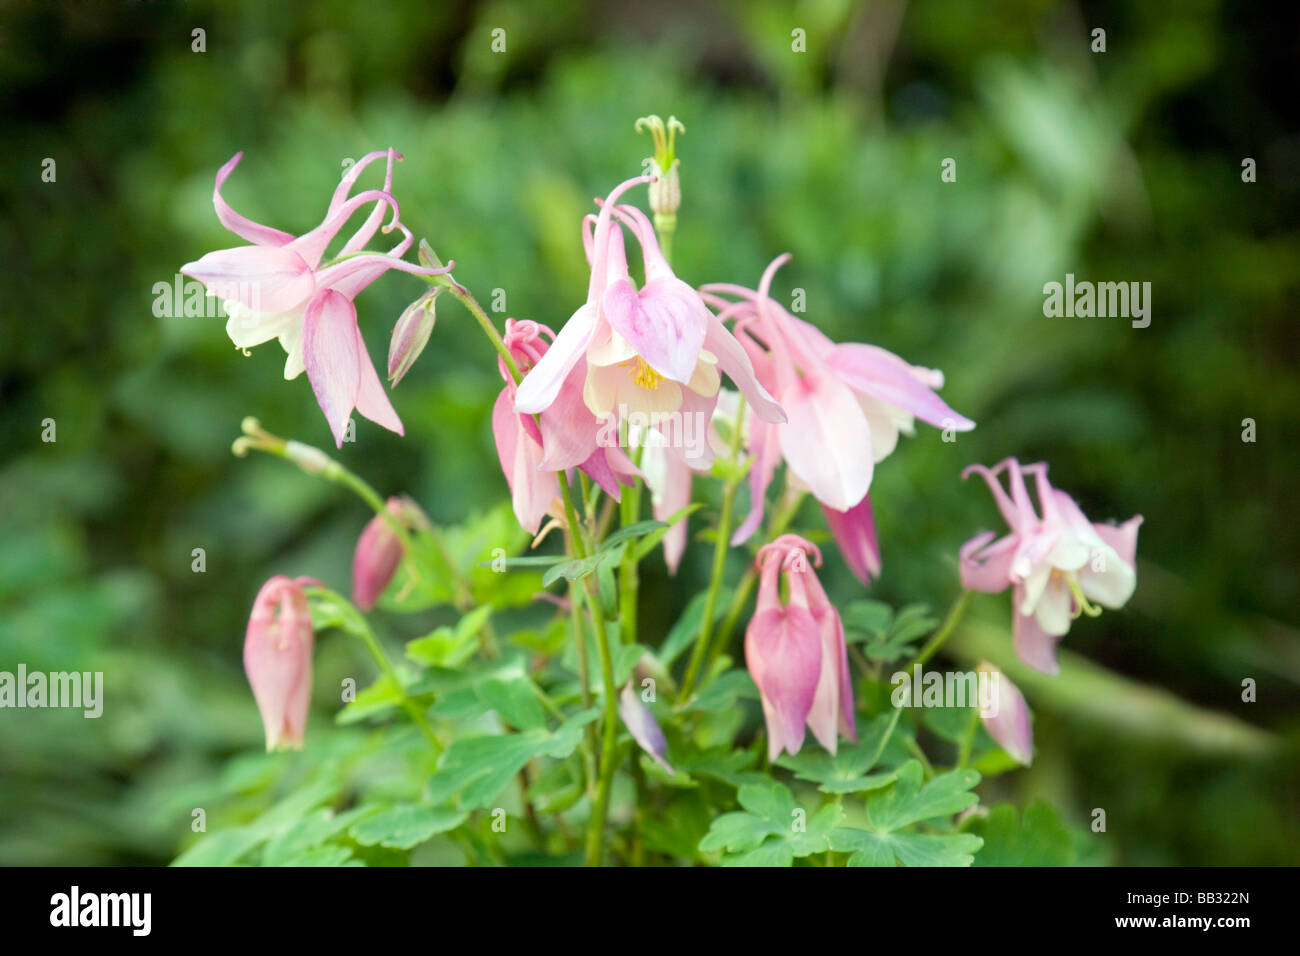 Pink Aquilegia flowers in an English garden, also known as Granny's Bonnet, or Columbine, a hardy perennial. UK Stock Photo